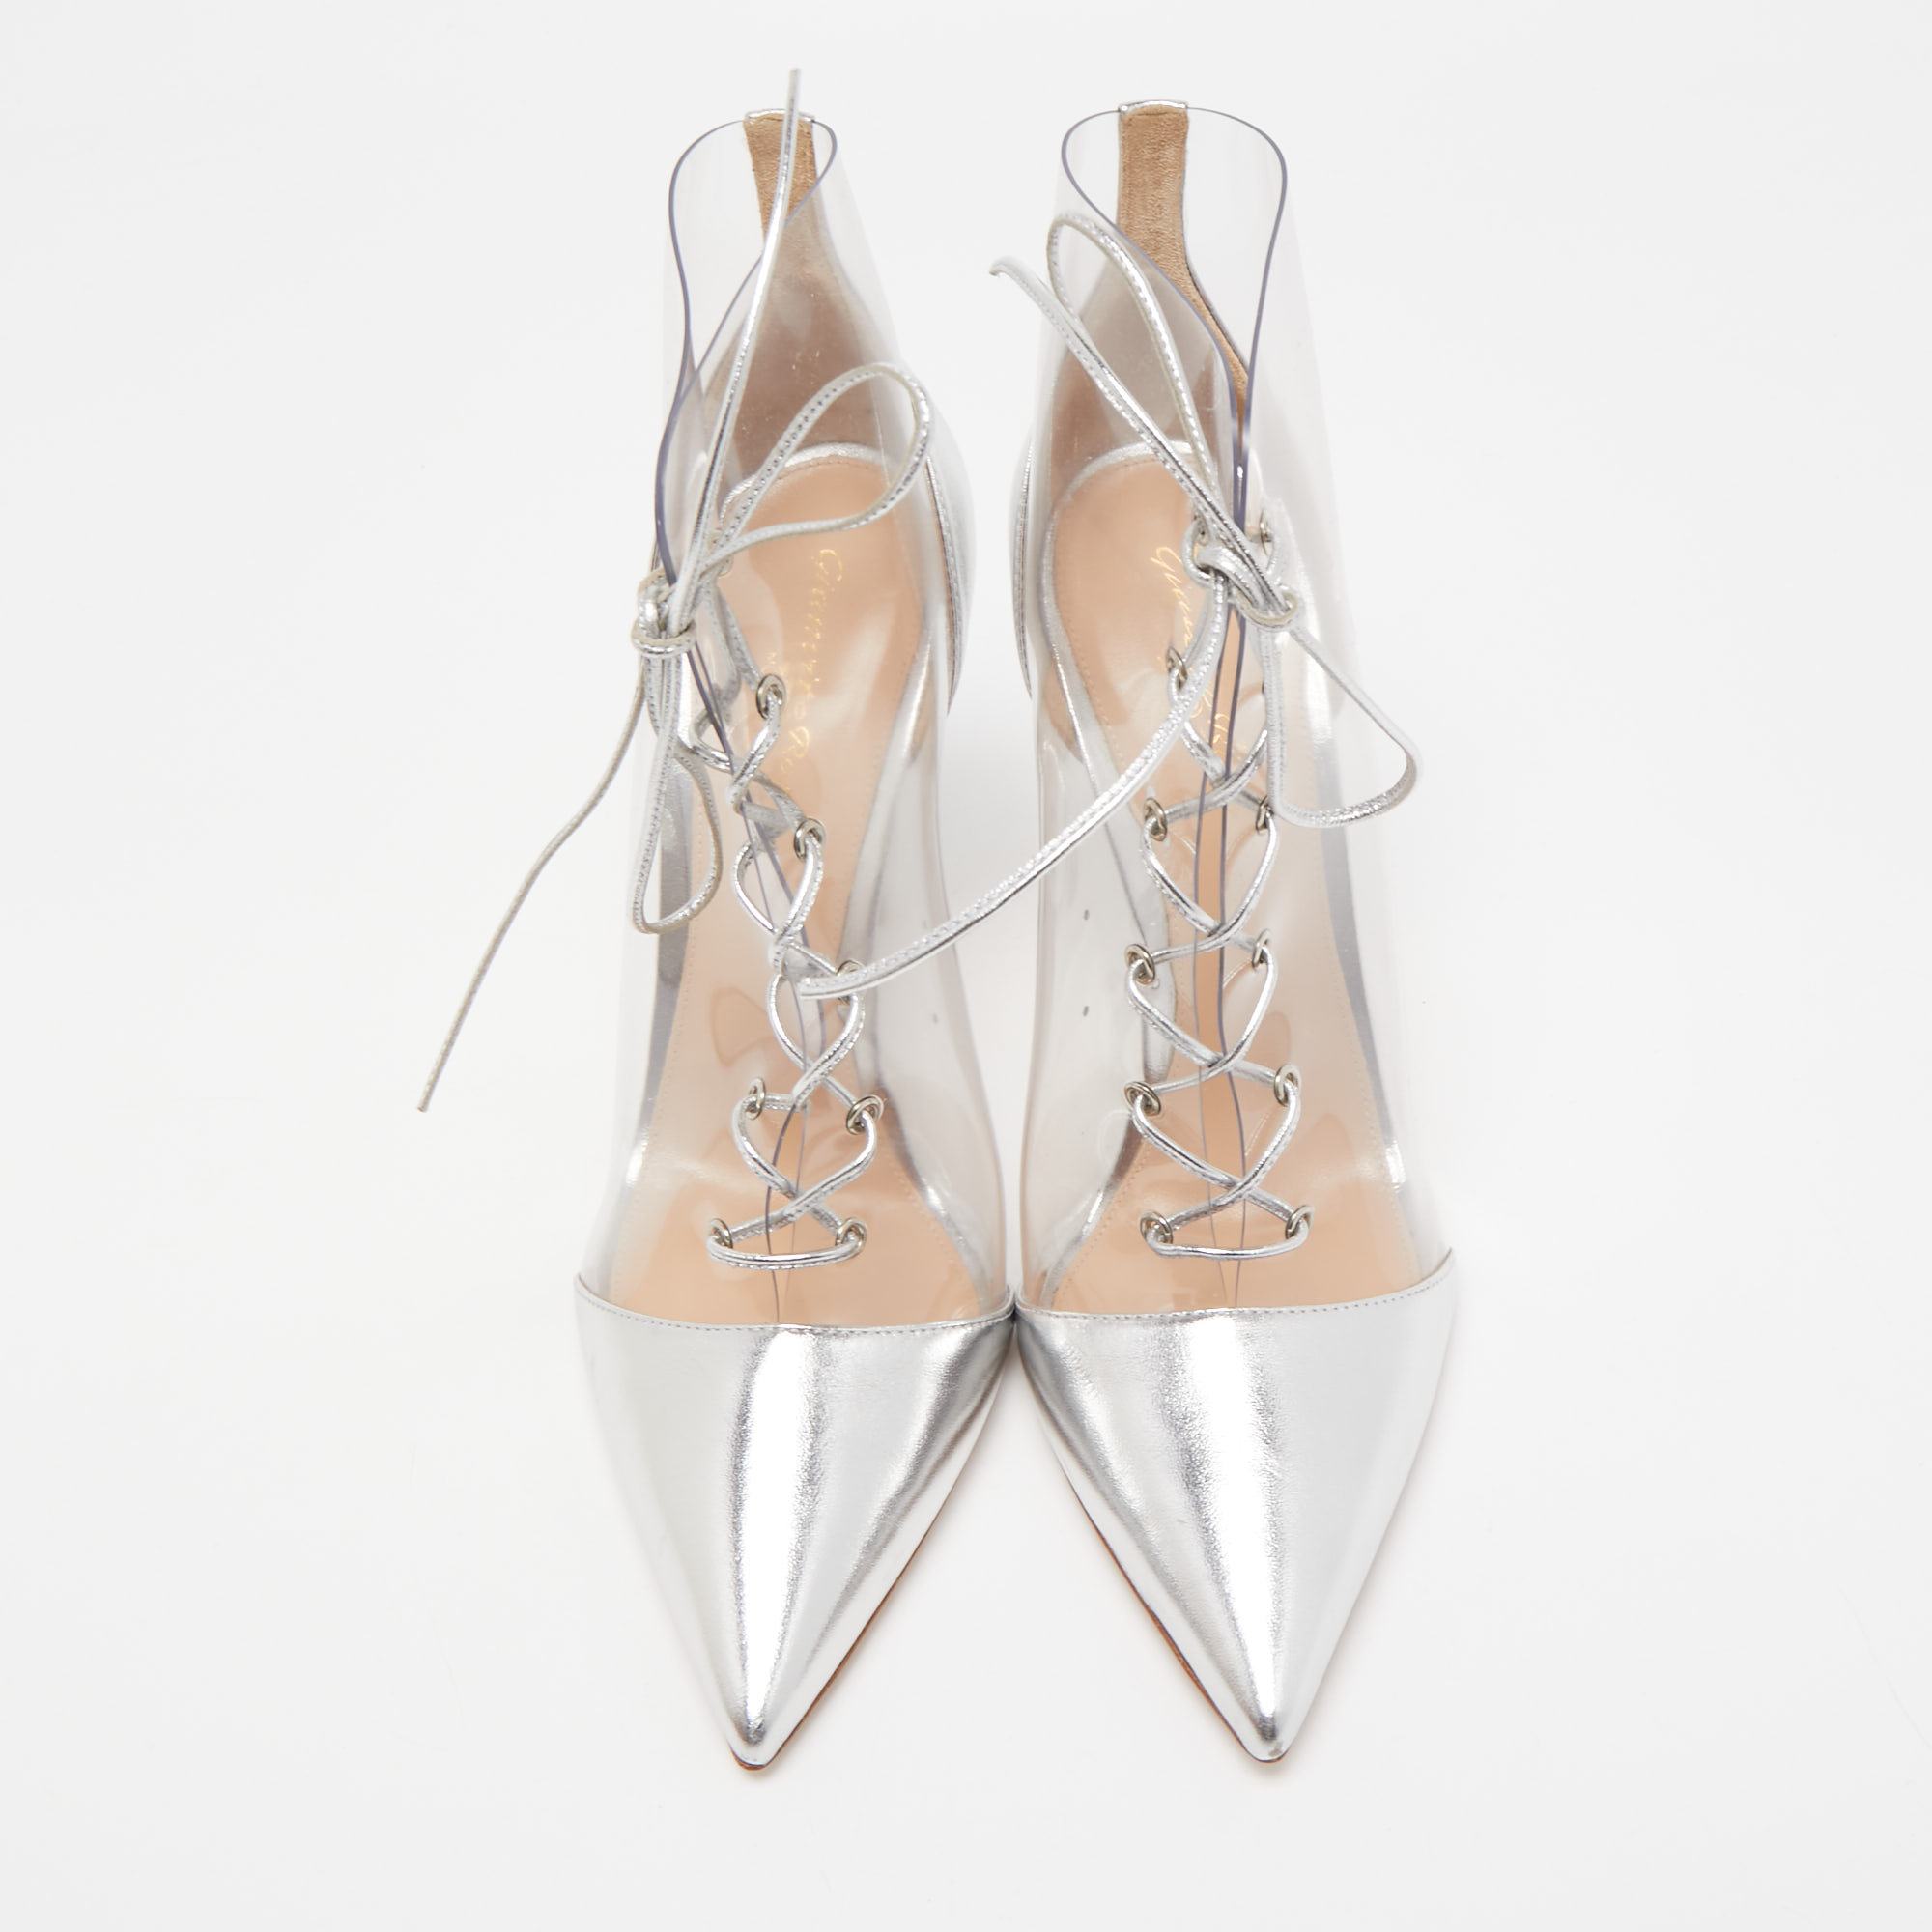 Gianvito Rossi Transparent/Silver PVC And Foil Leather Plexi Lace-Up Ankle Booties Size 40.5